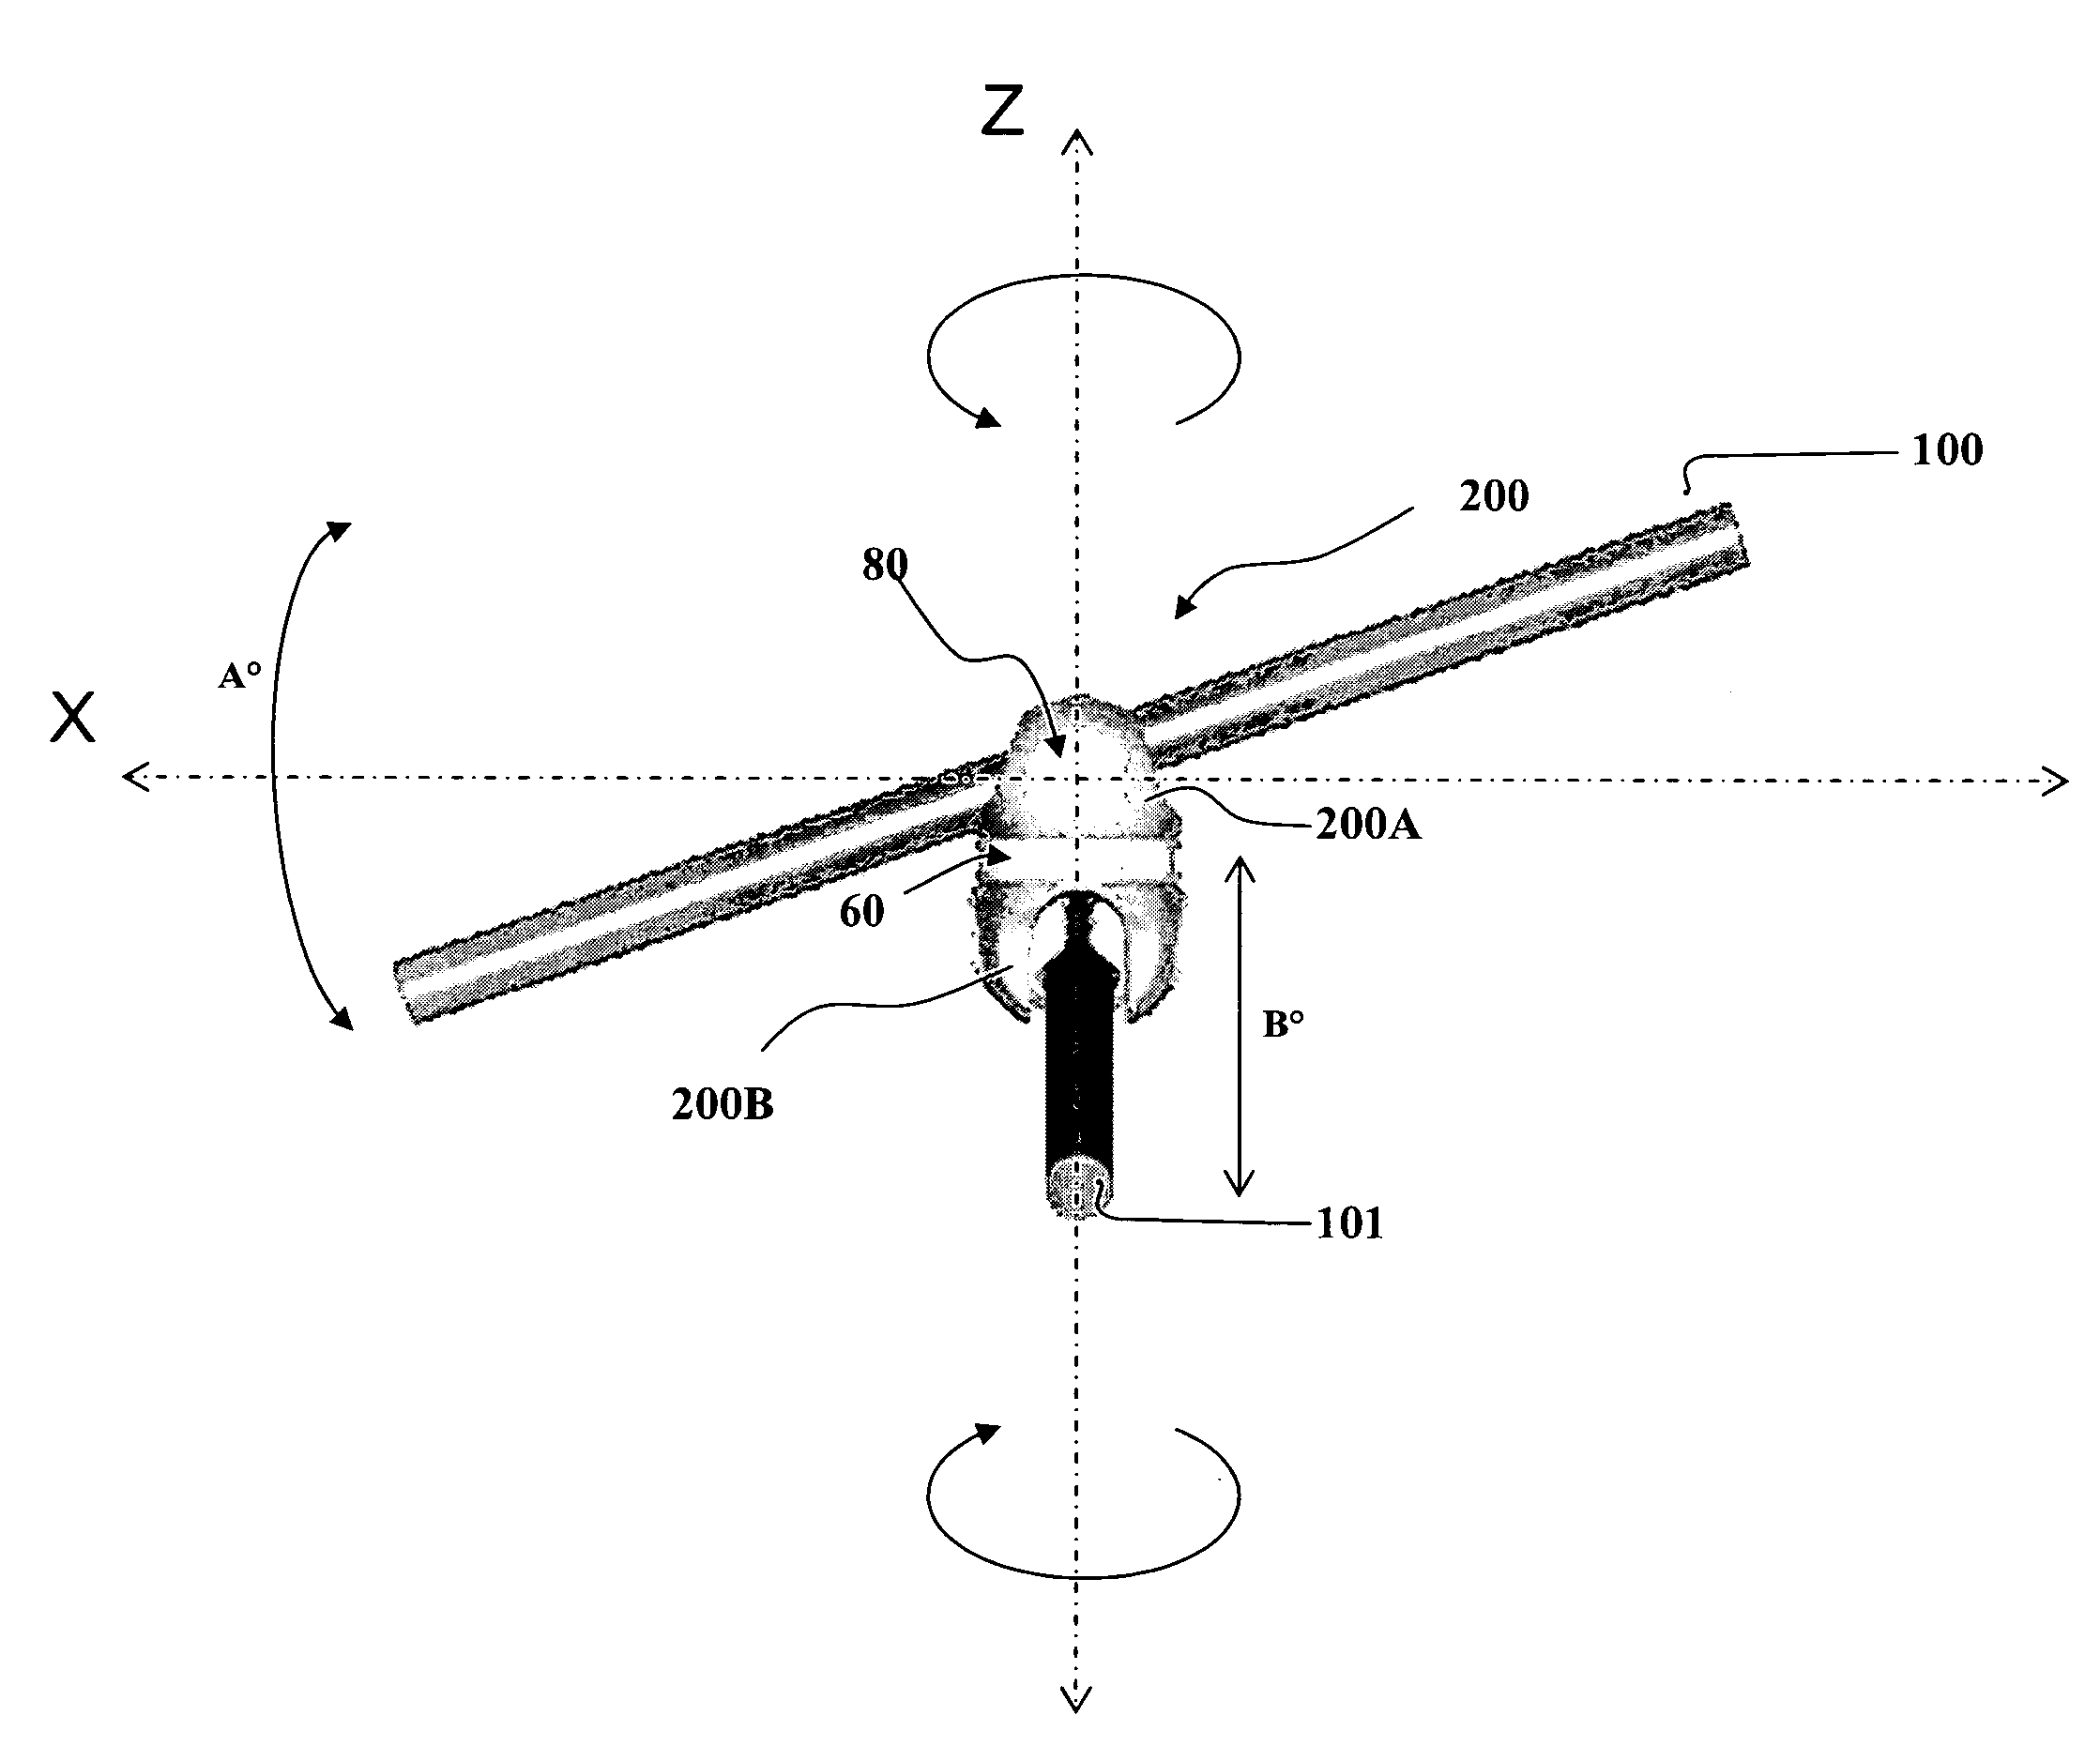 Articulation apparatus for external fixation device